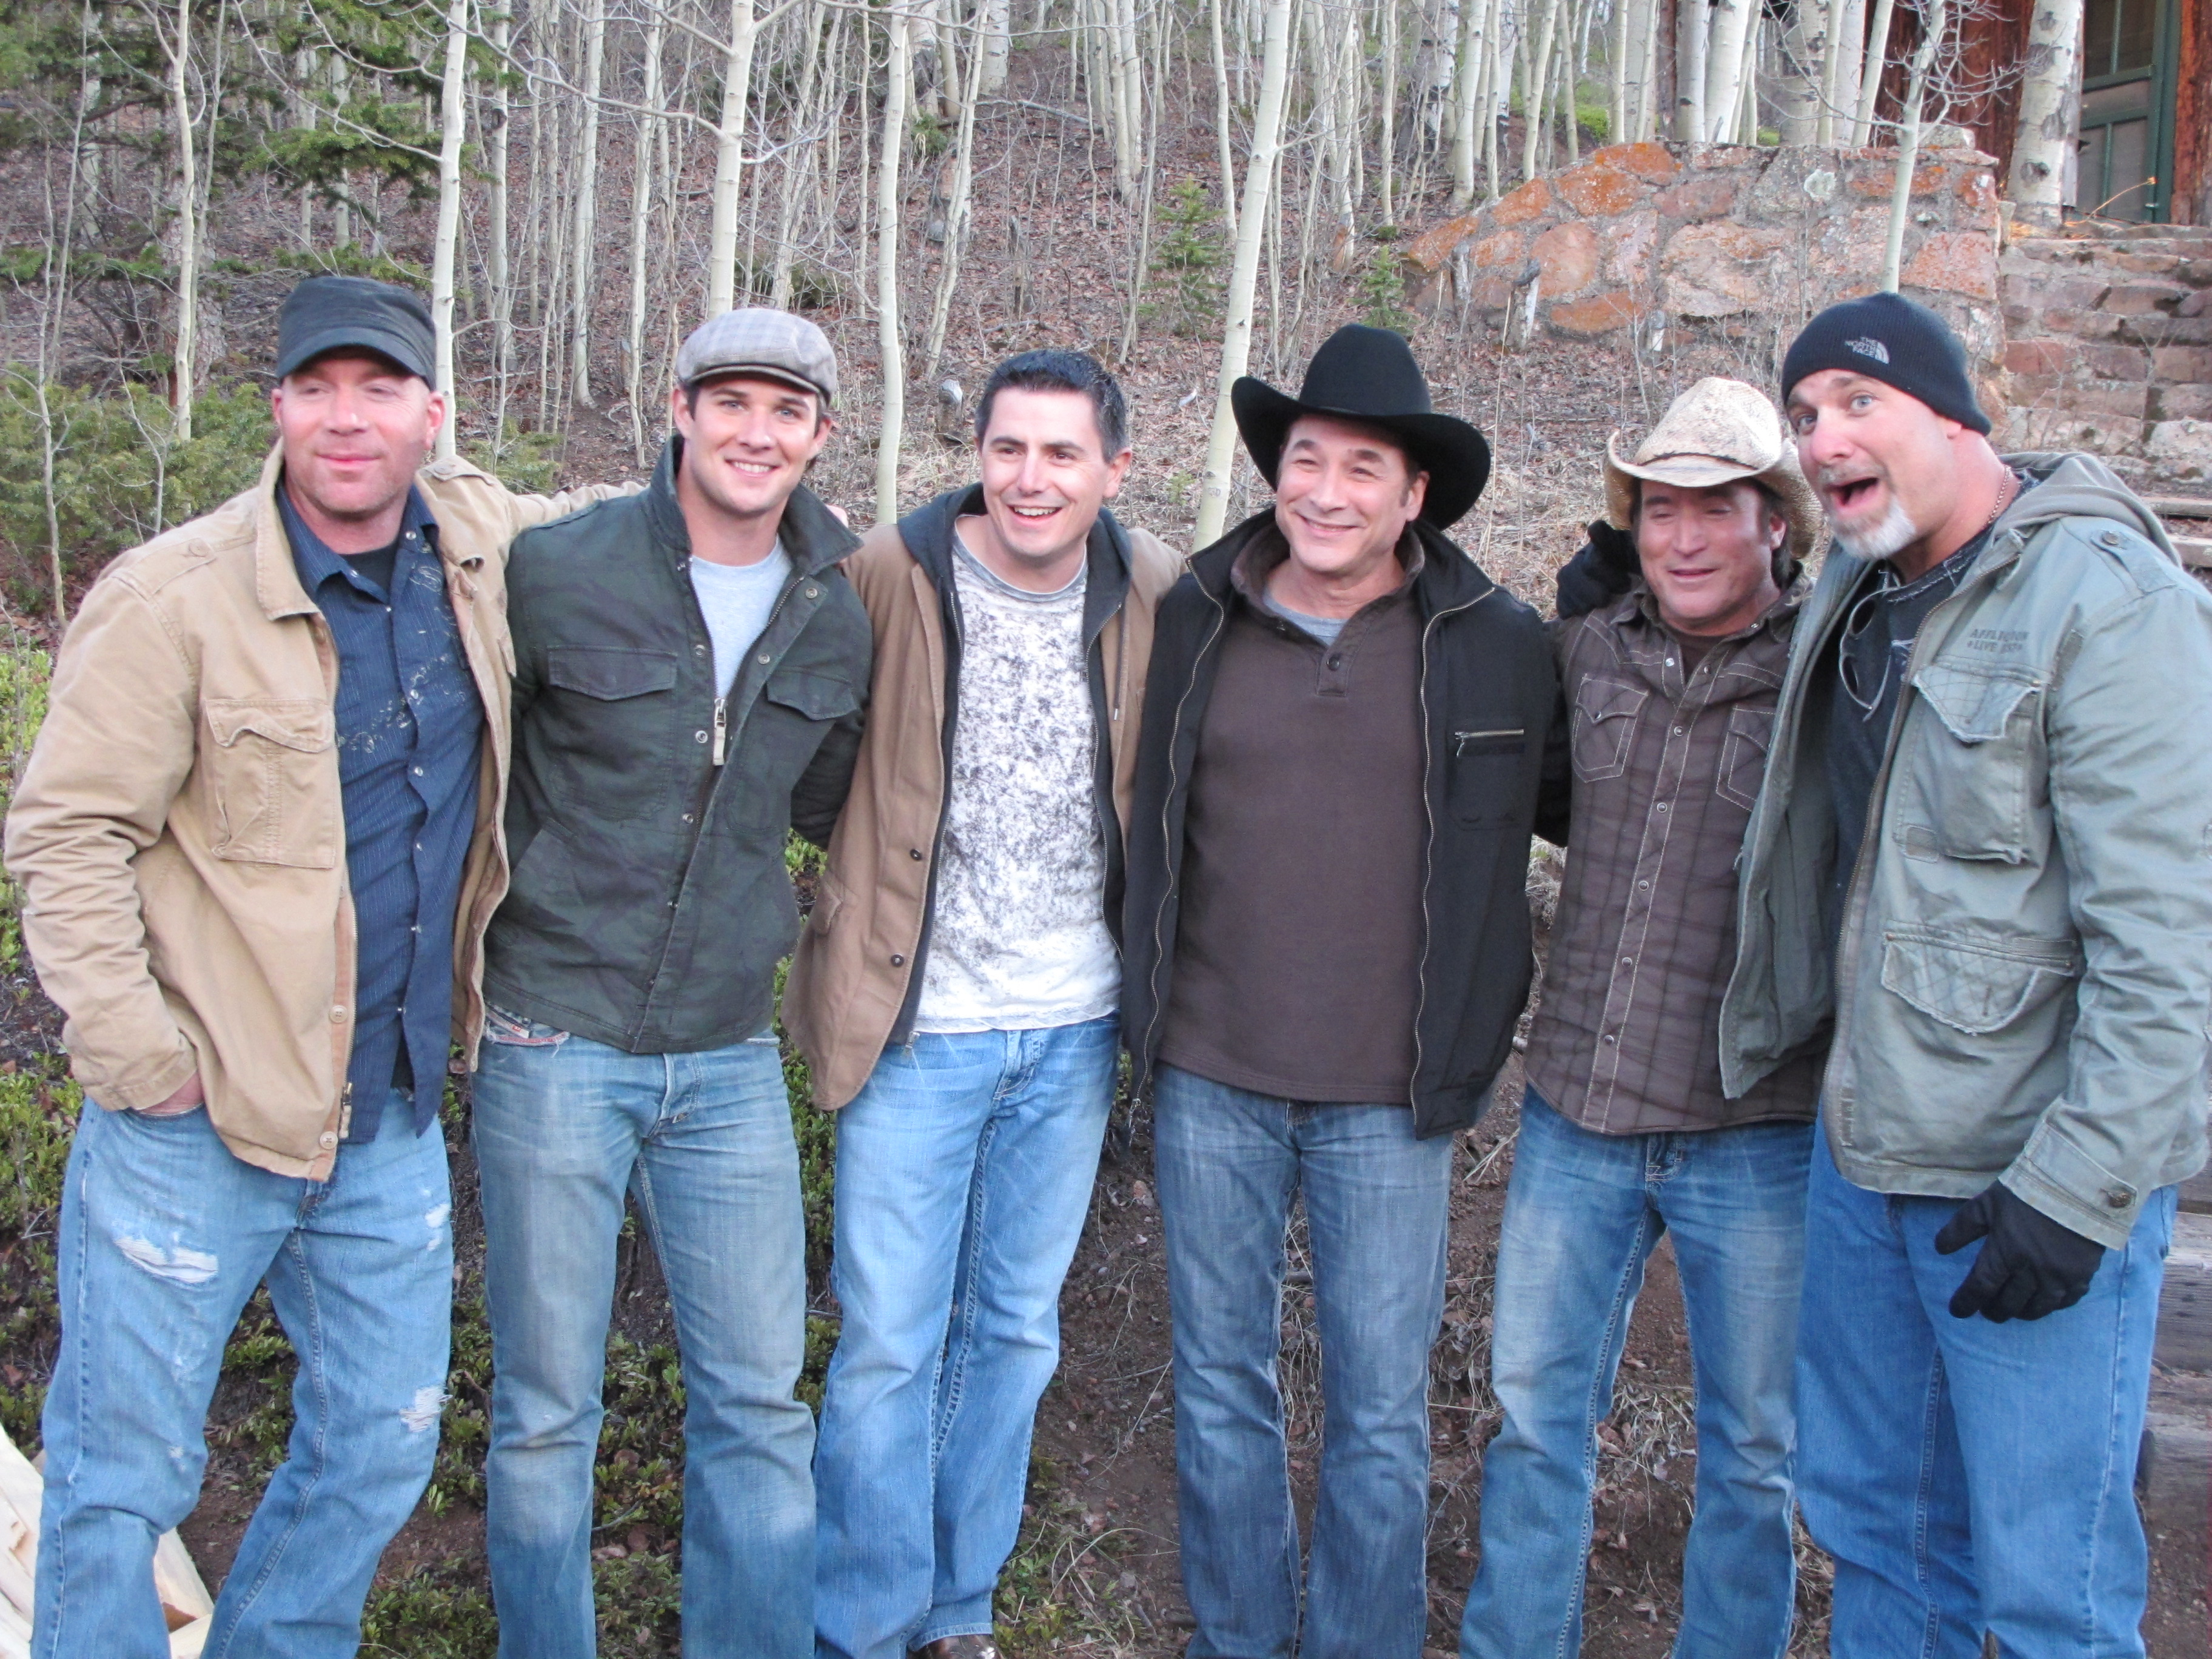 Ryan Johnston was an Executive Producer on the Sons of the Fallen, a LIVE Fathom Event seen in AMC and Regal theaters across the country. PIctured with Ryan Merriman, Joey and John Truscelli, Clint Black, and Bill Goldberg.